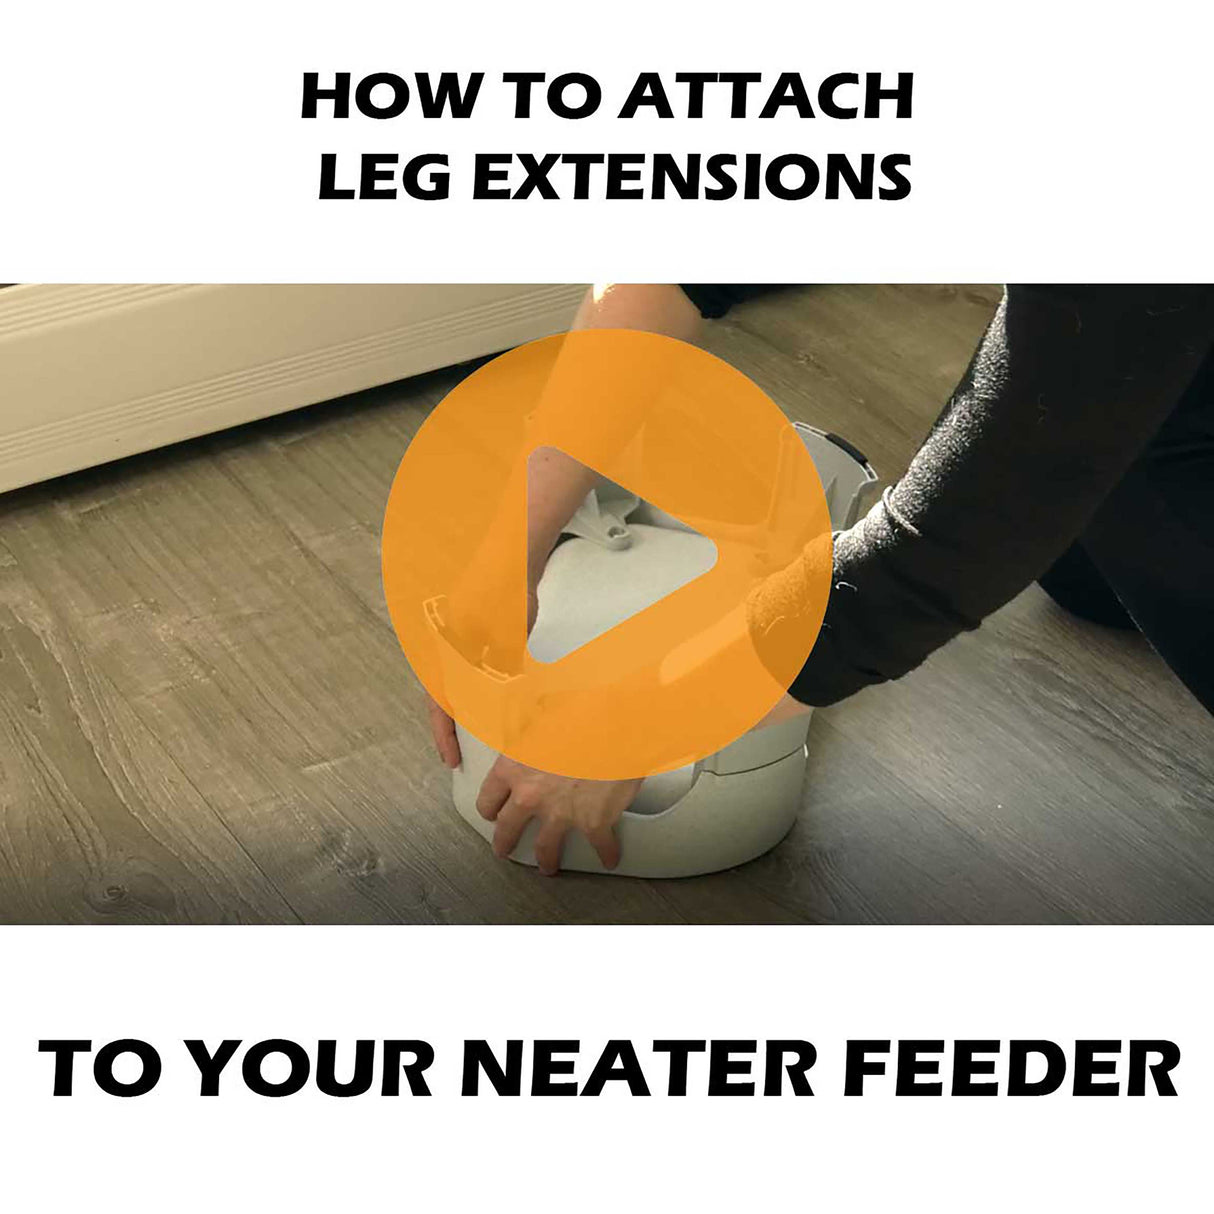 Video showing how to add leg extensions